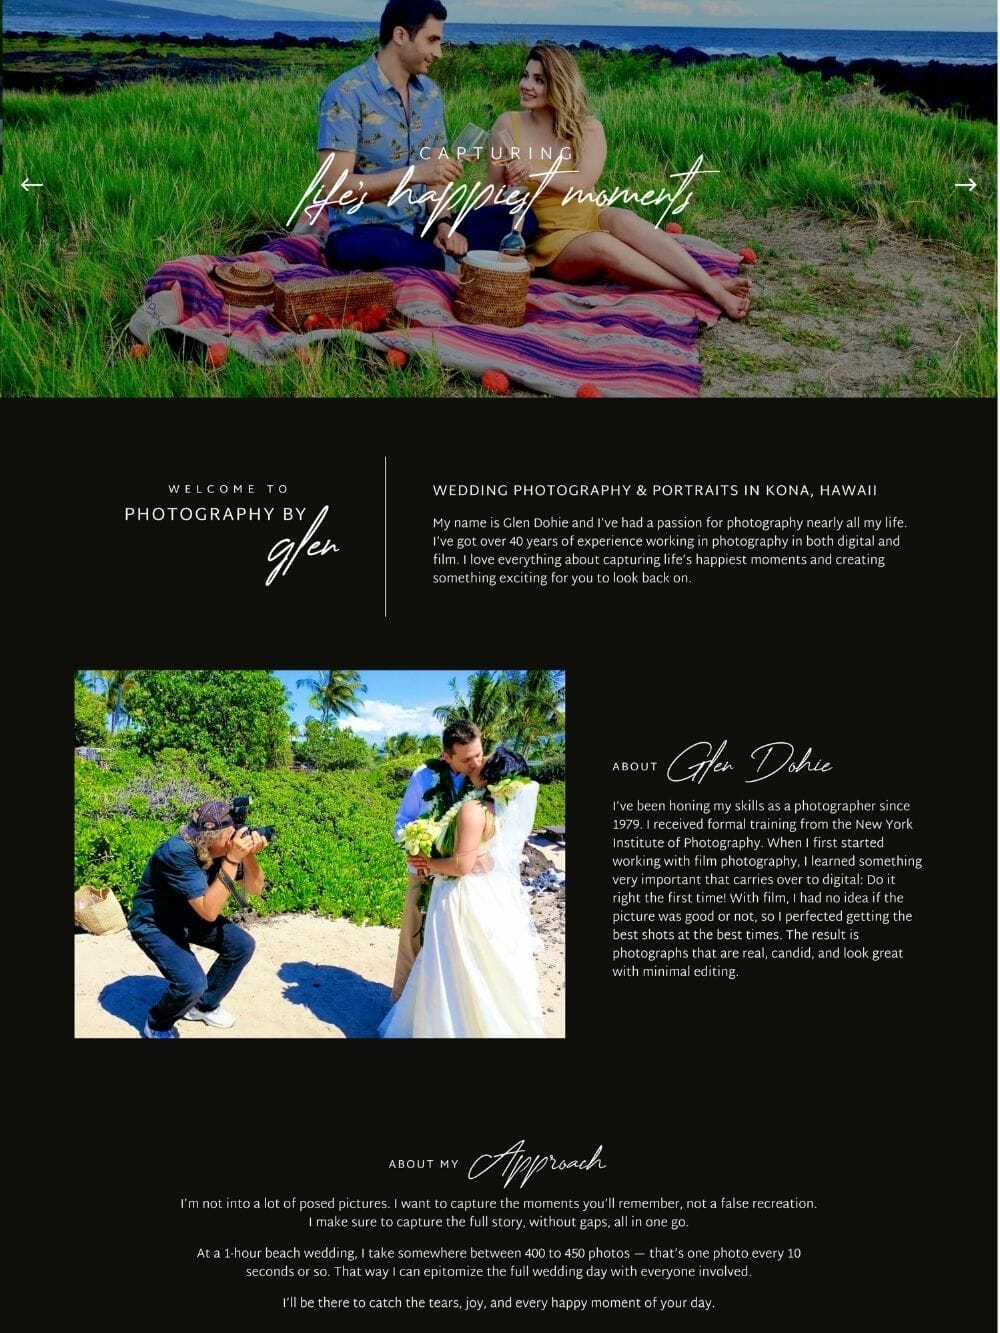 Home page for Photography By Glen